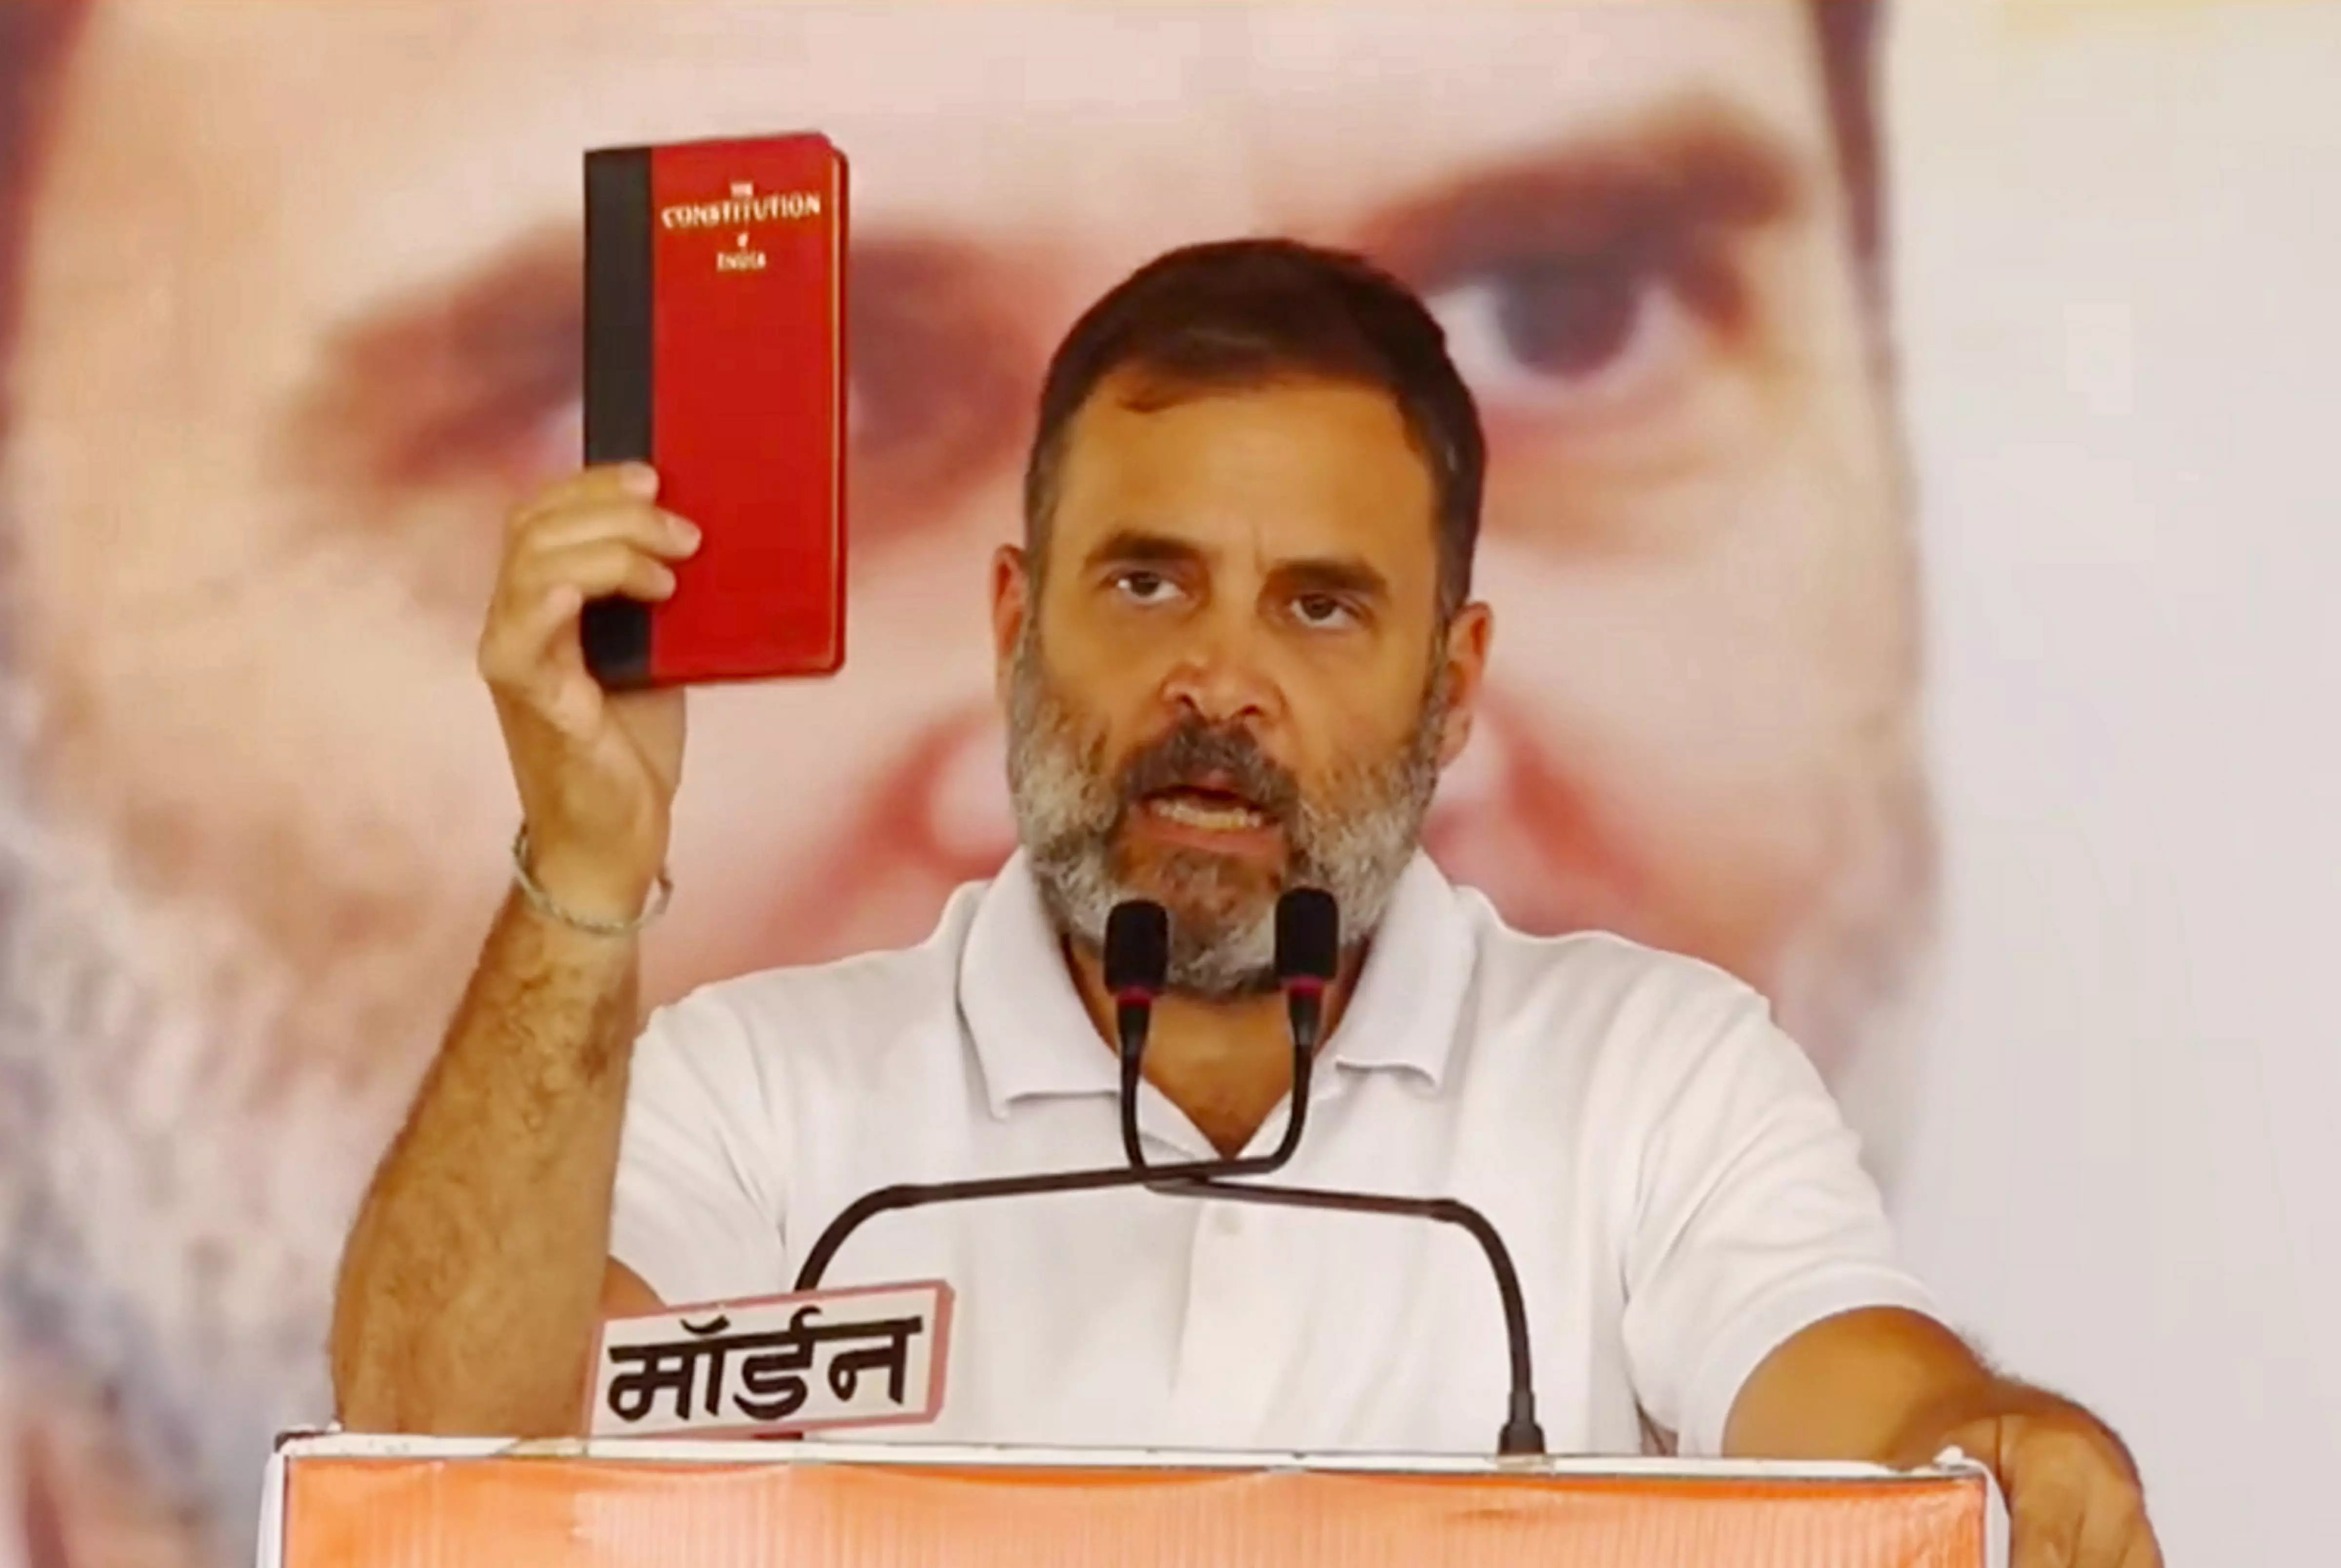 BJP will throw away constitution if it wins: Rahul